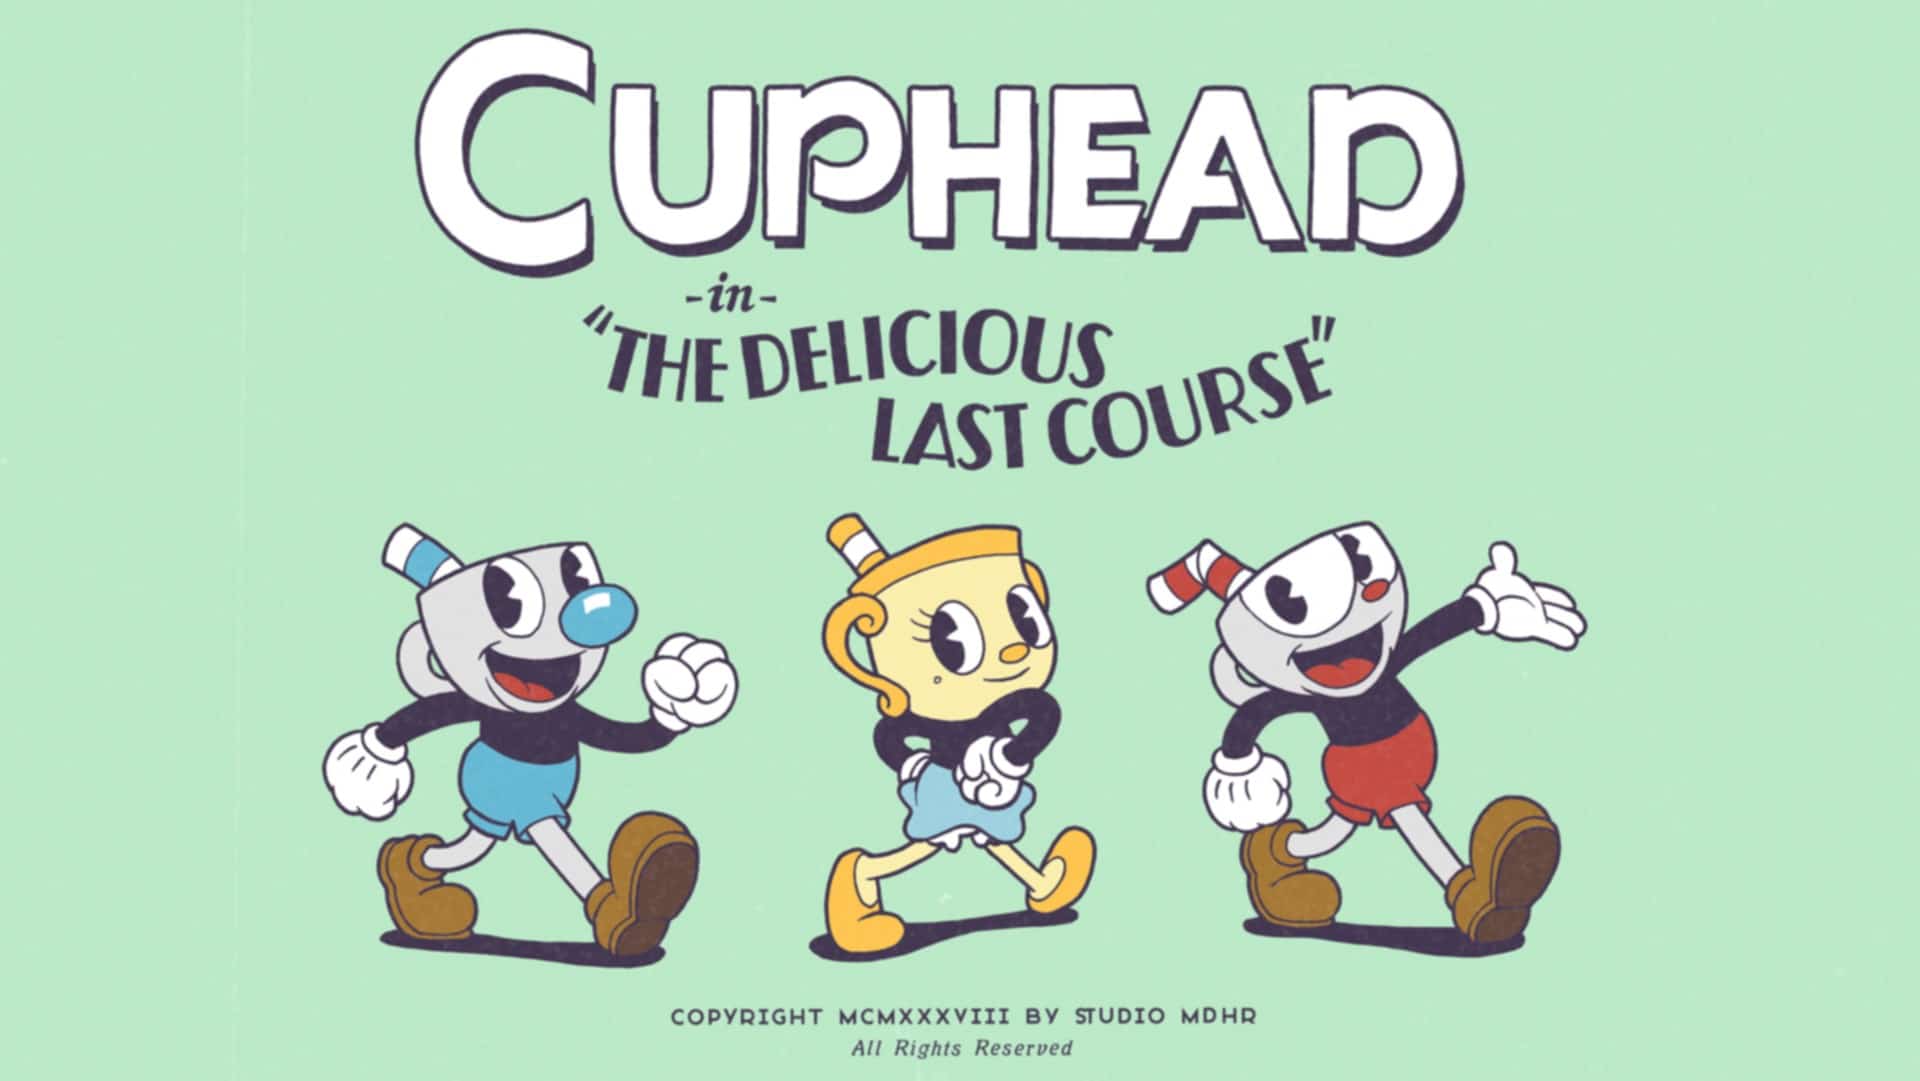 Hollywood Wereldrecord Guinness Book verwijderen Cuphead DLC: A Closer Look at the New Bosses and Levels - Cheat Code Central